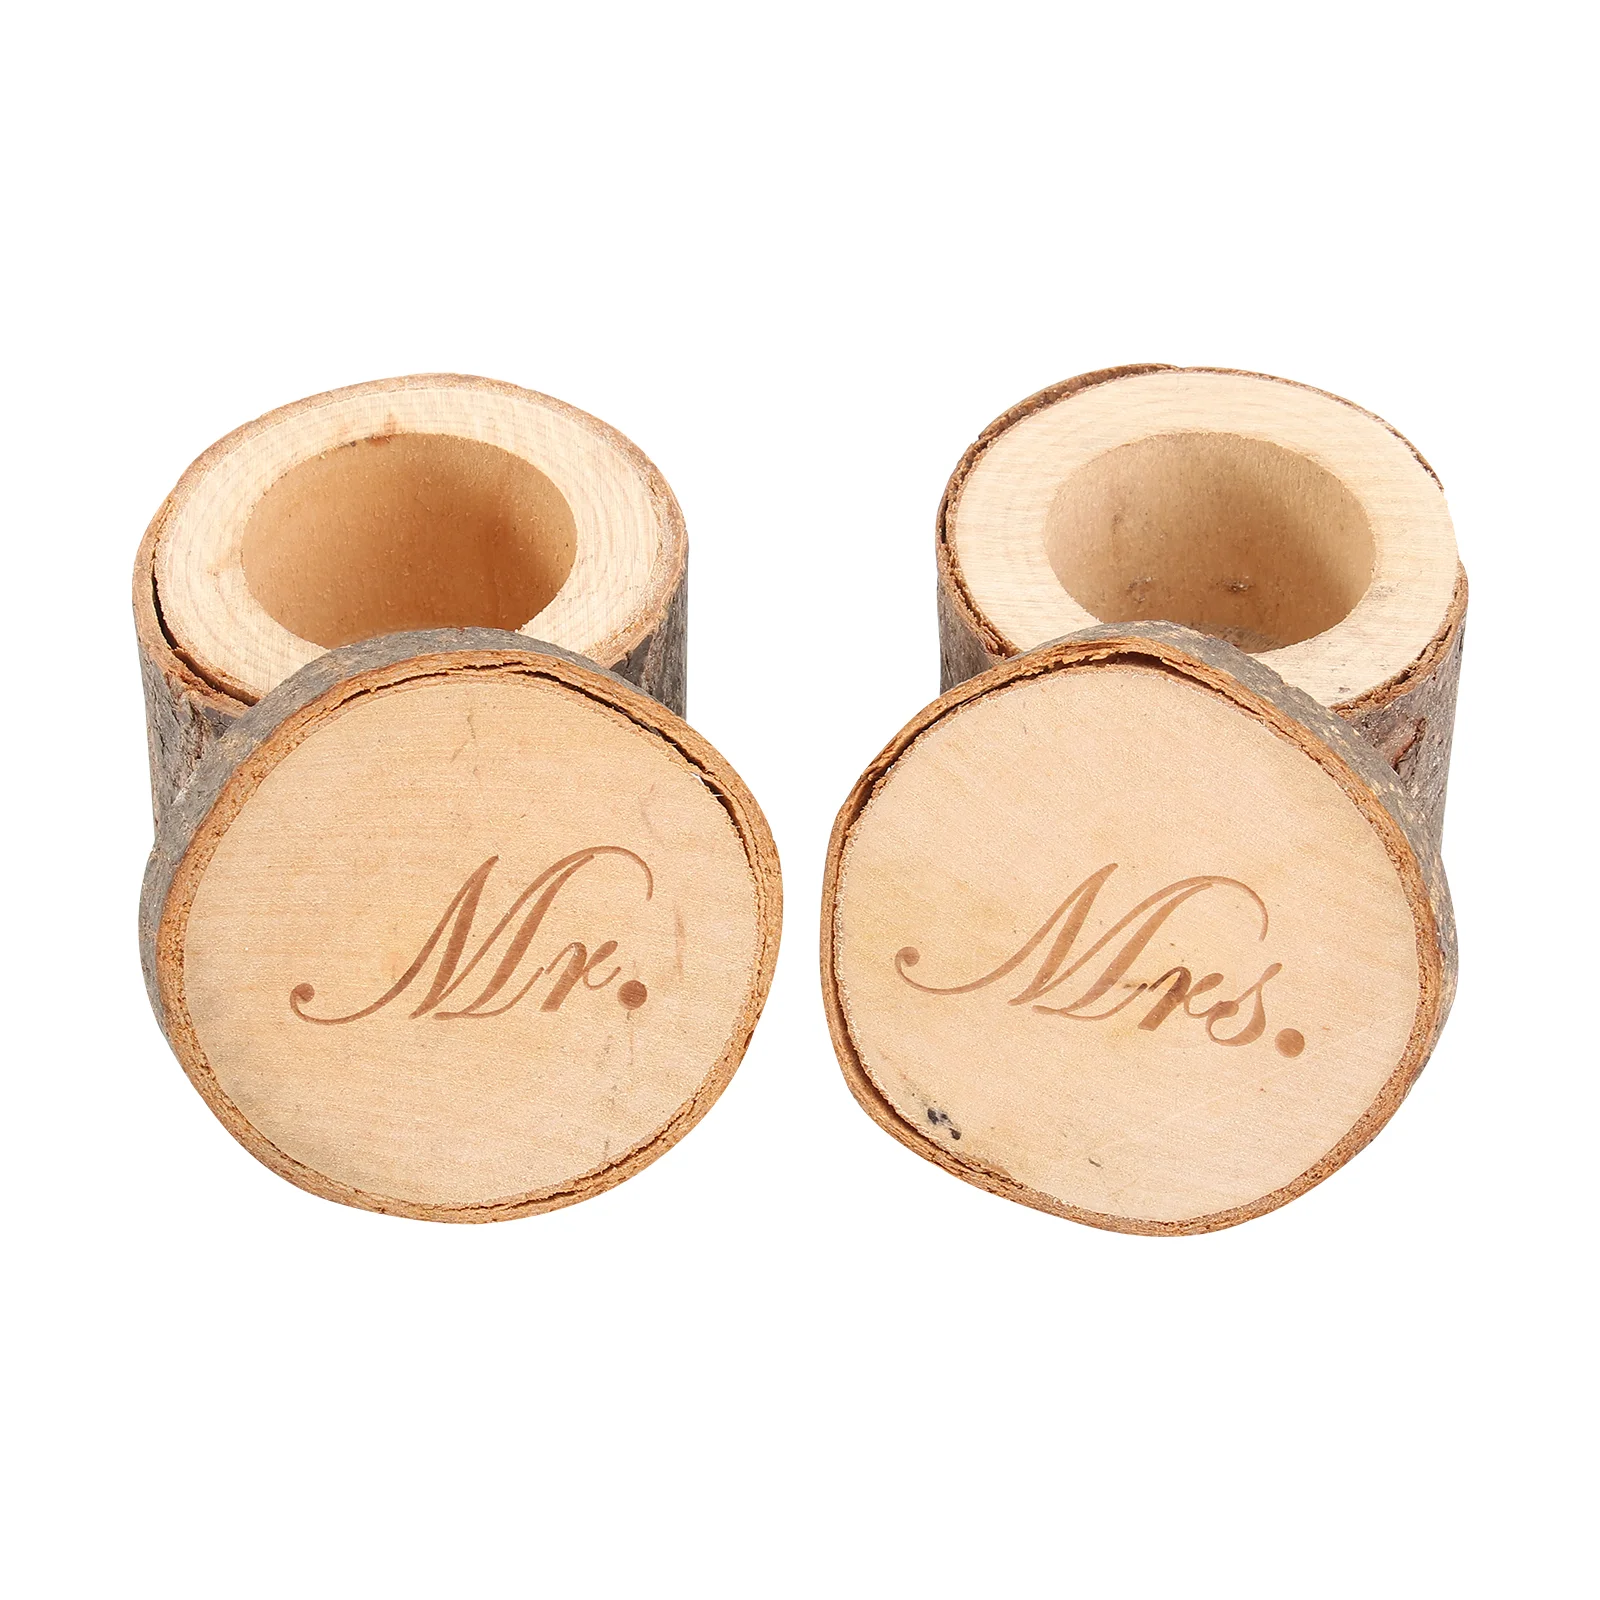 

Box Ring Jewelry Boxeswooden Proposal Gift Bulk Cute Rustic Wedding Ceremony Girlsvintage